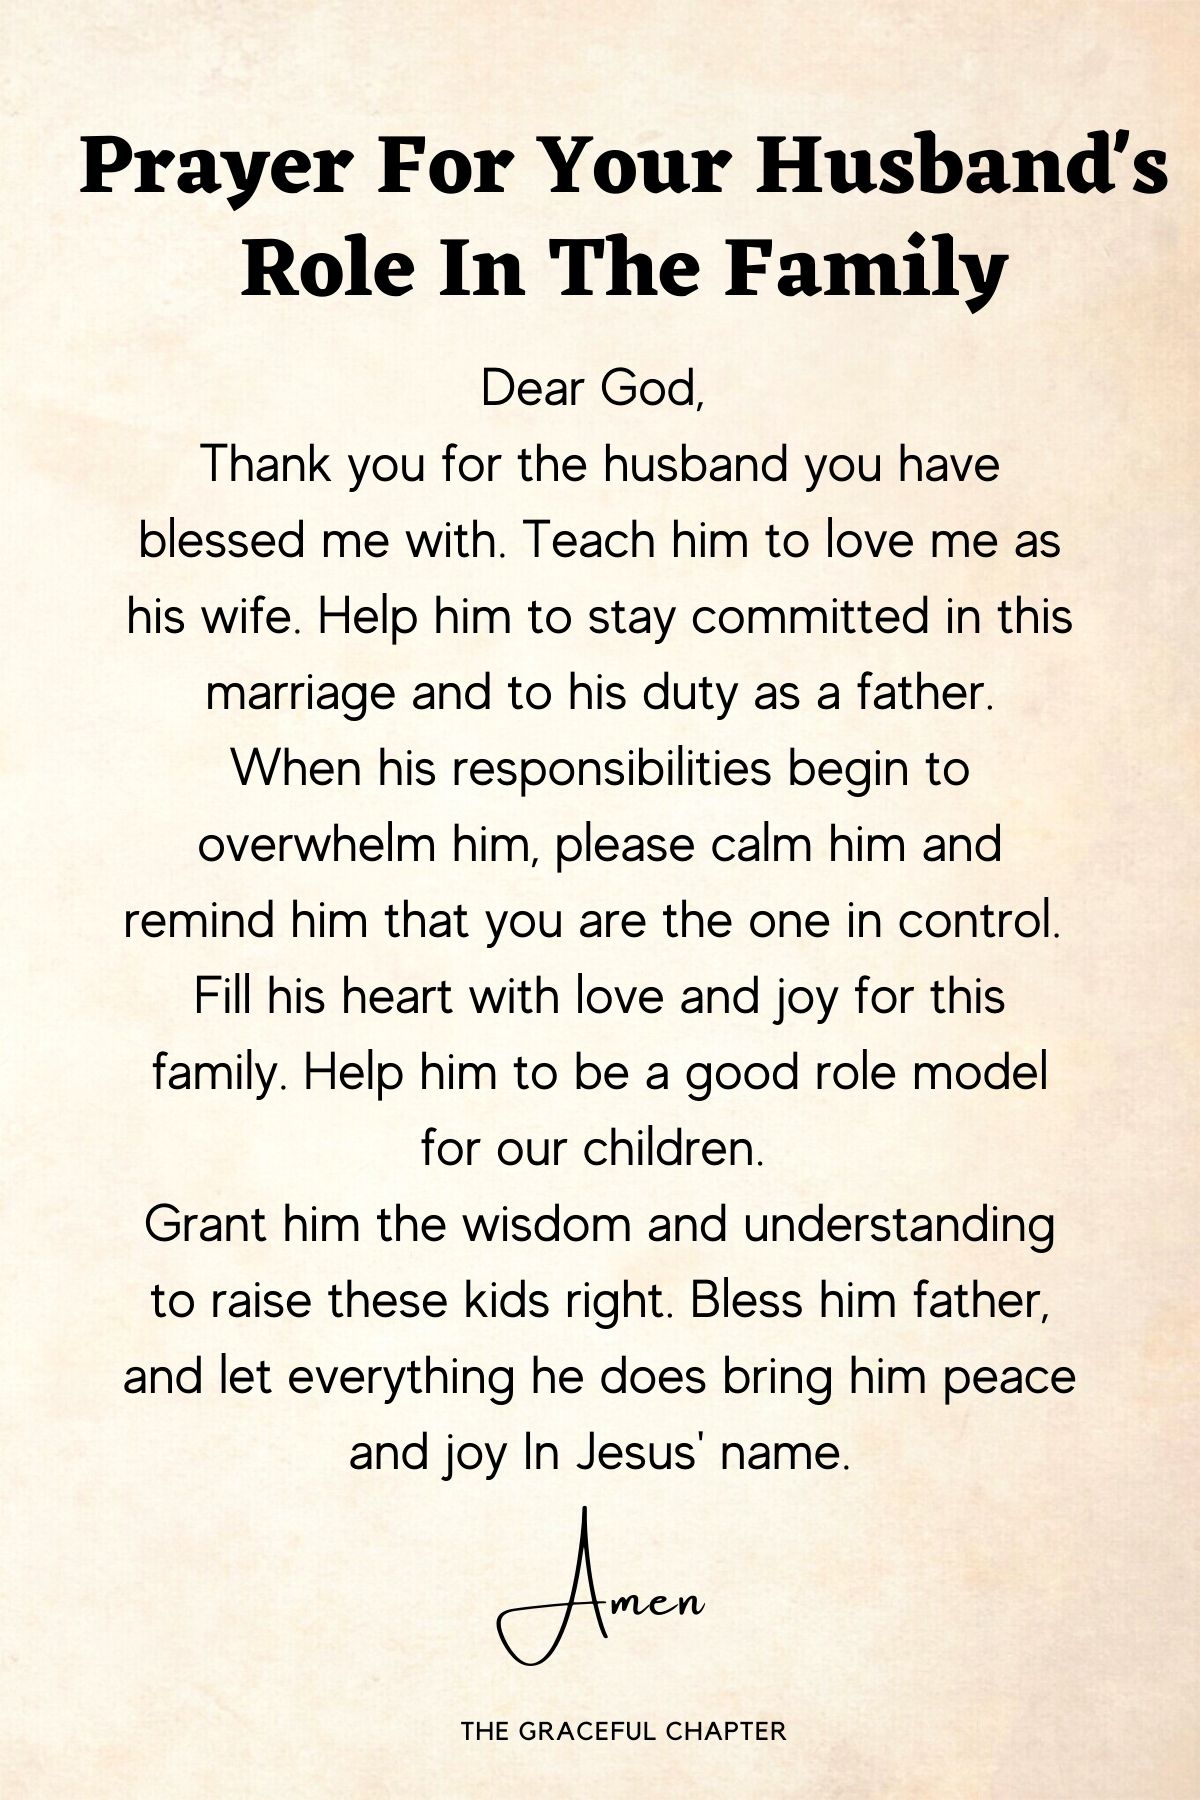 Prayer for your husband's role